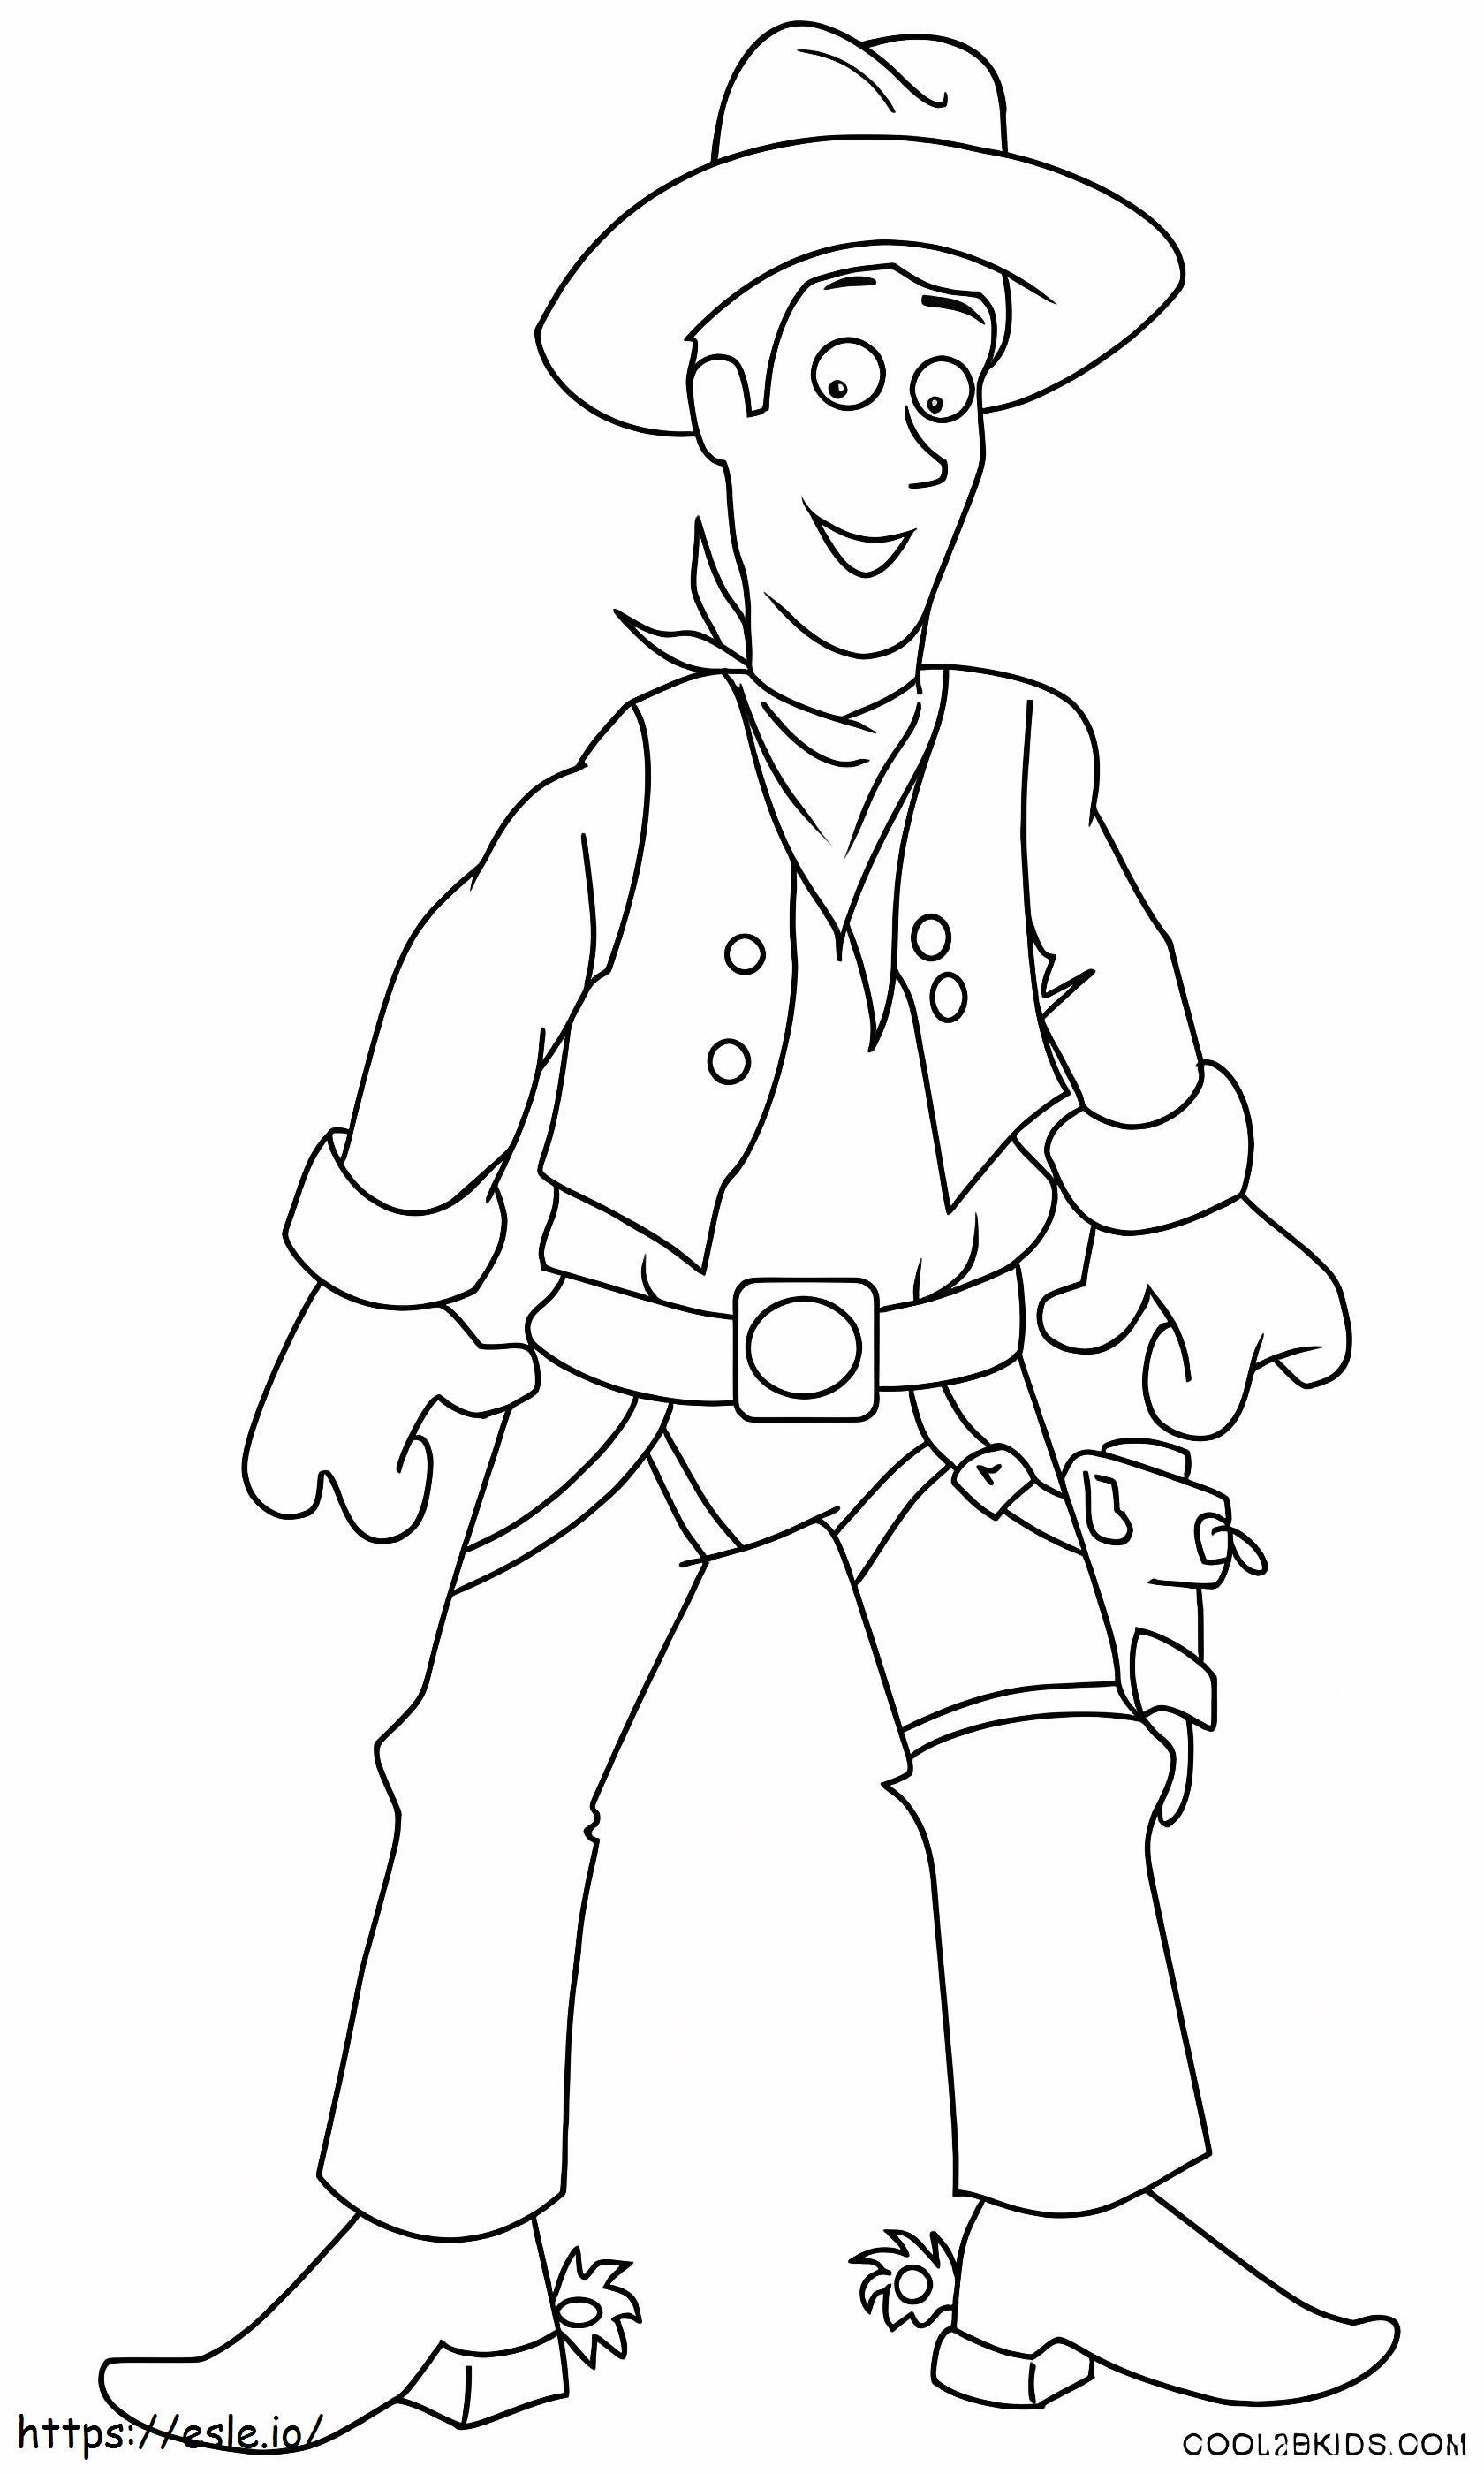 Simple Jean coloring page